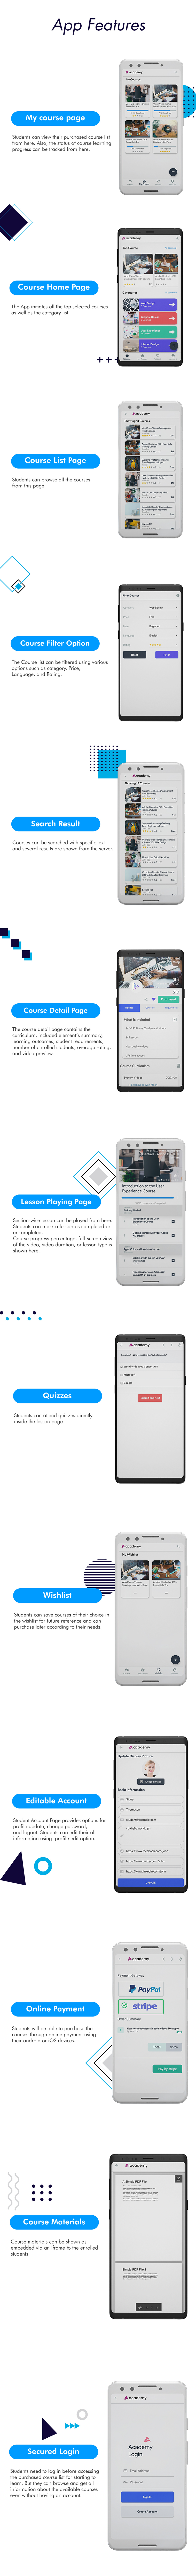 Academy Lms Mobile App - Flutter iOS & Android - 4